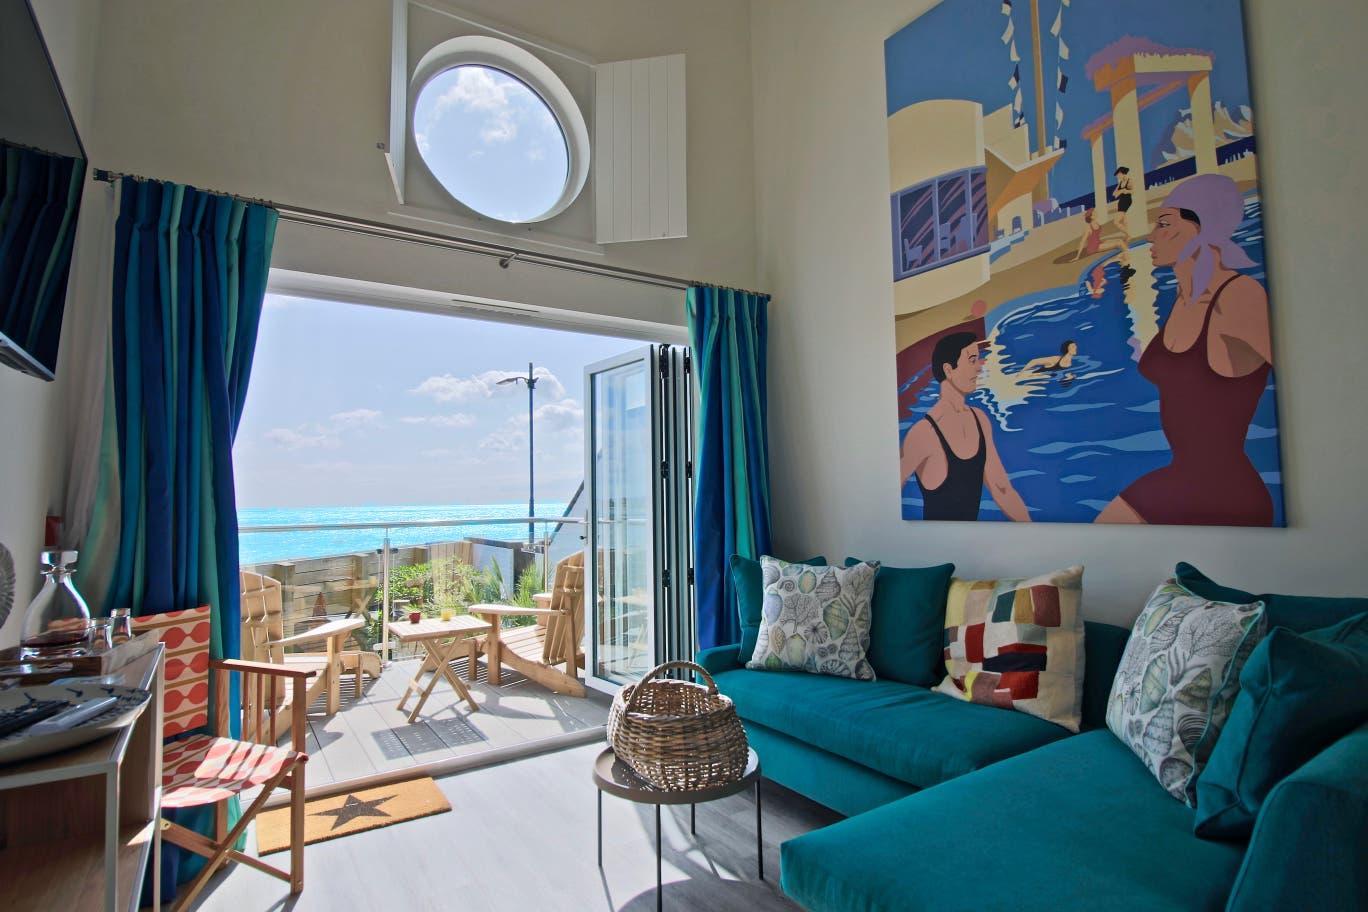 Beachcroft Beach Hut Suites look out onto pebbly Felpham Beach in West Sussex